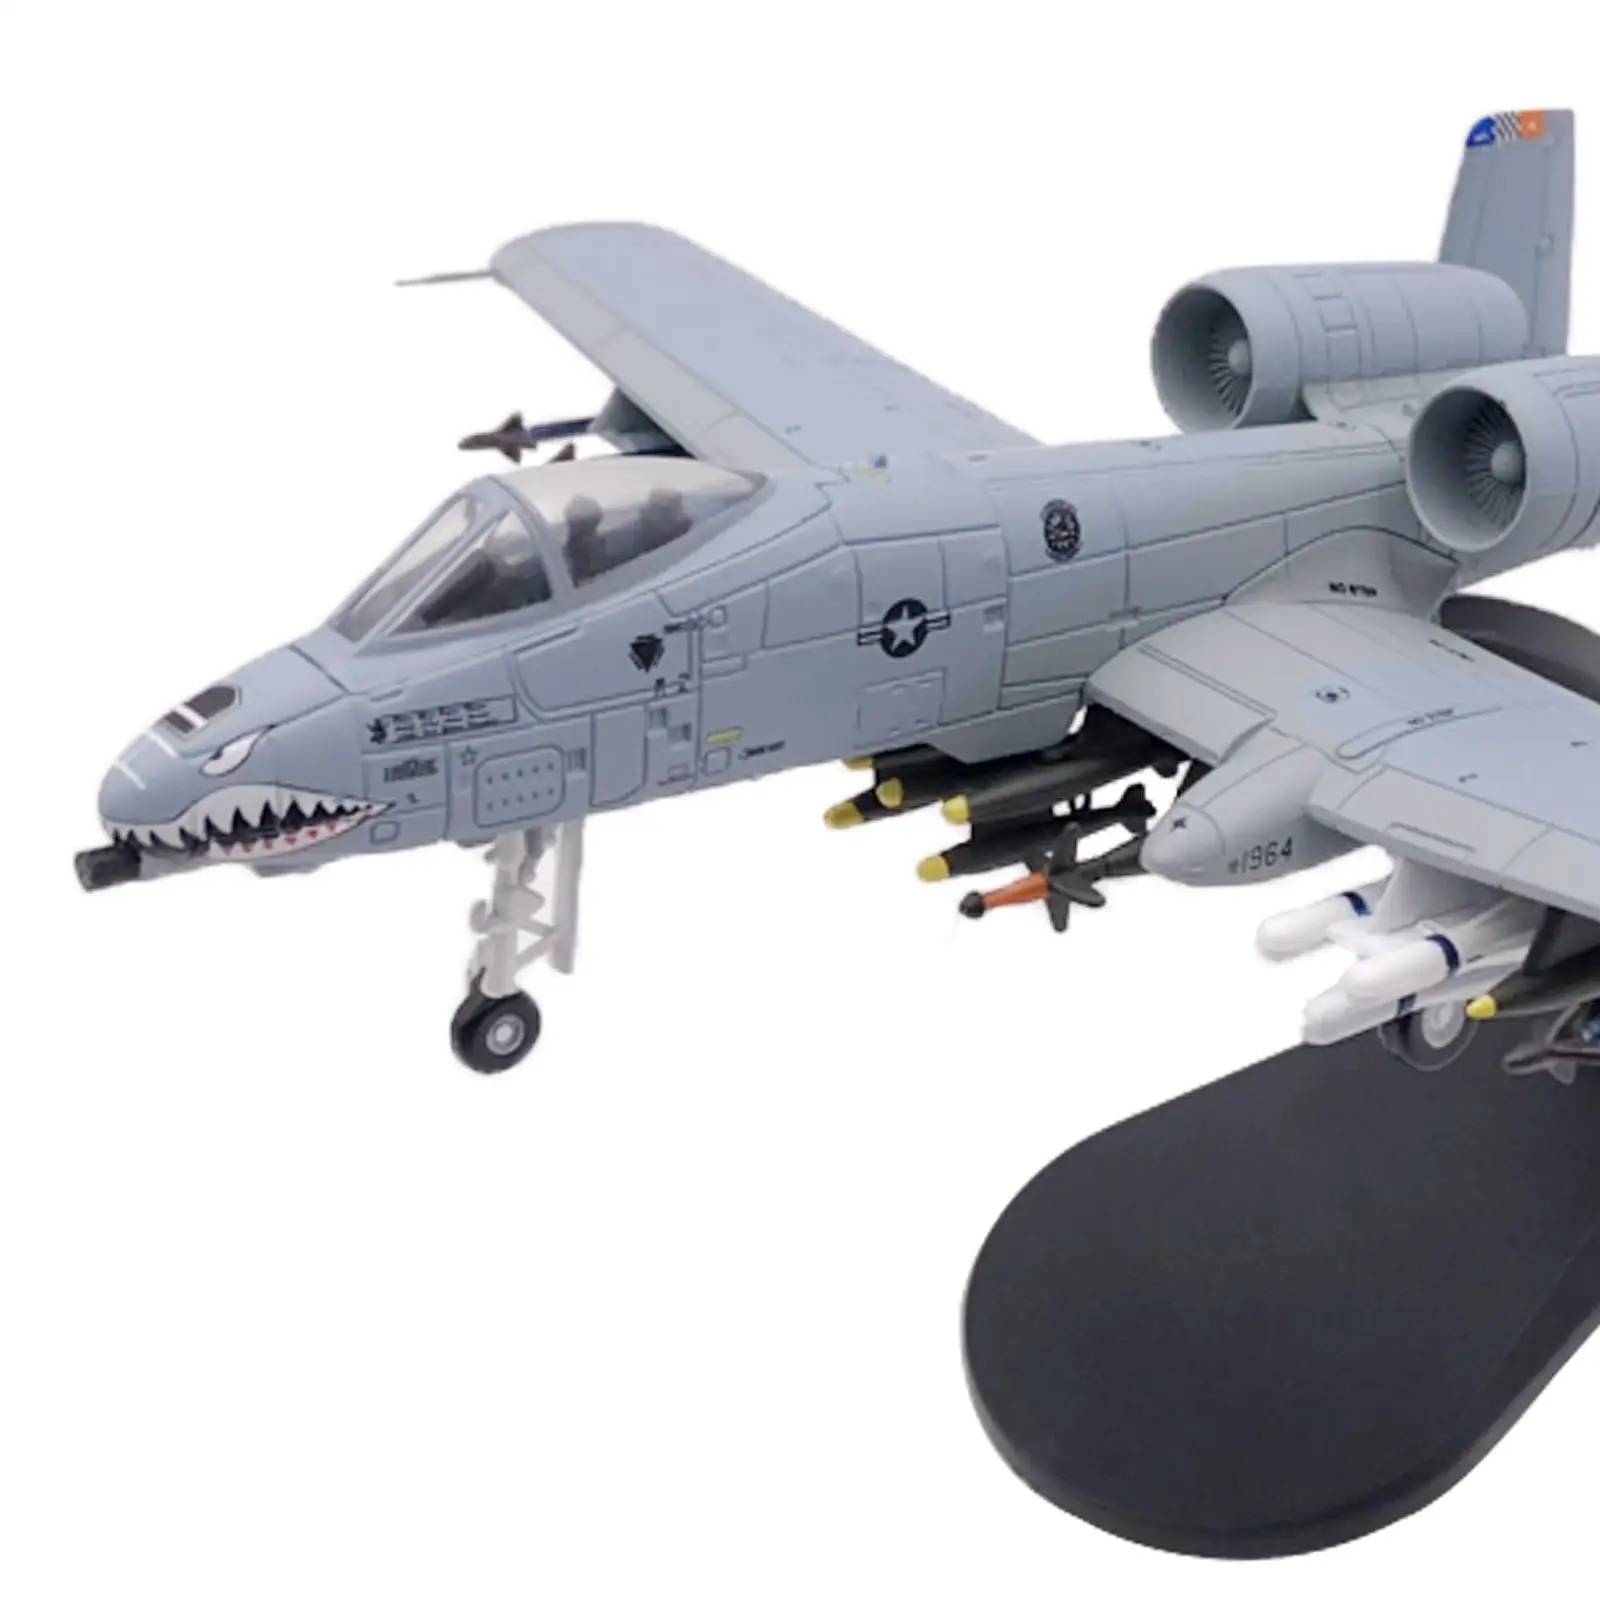 1/100 Diecast Fighter Kids Toy A-10 Attack Plane Aircraft Military Model, for Home Office Decoration